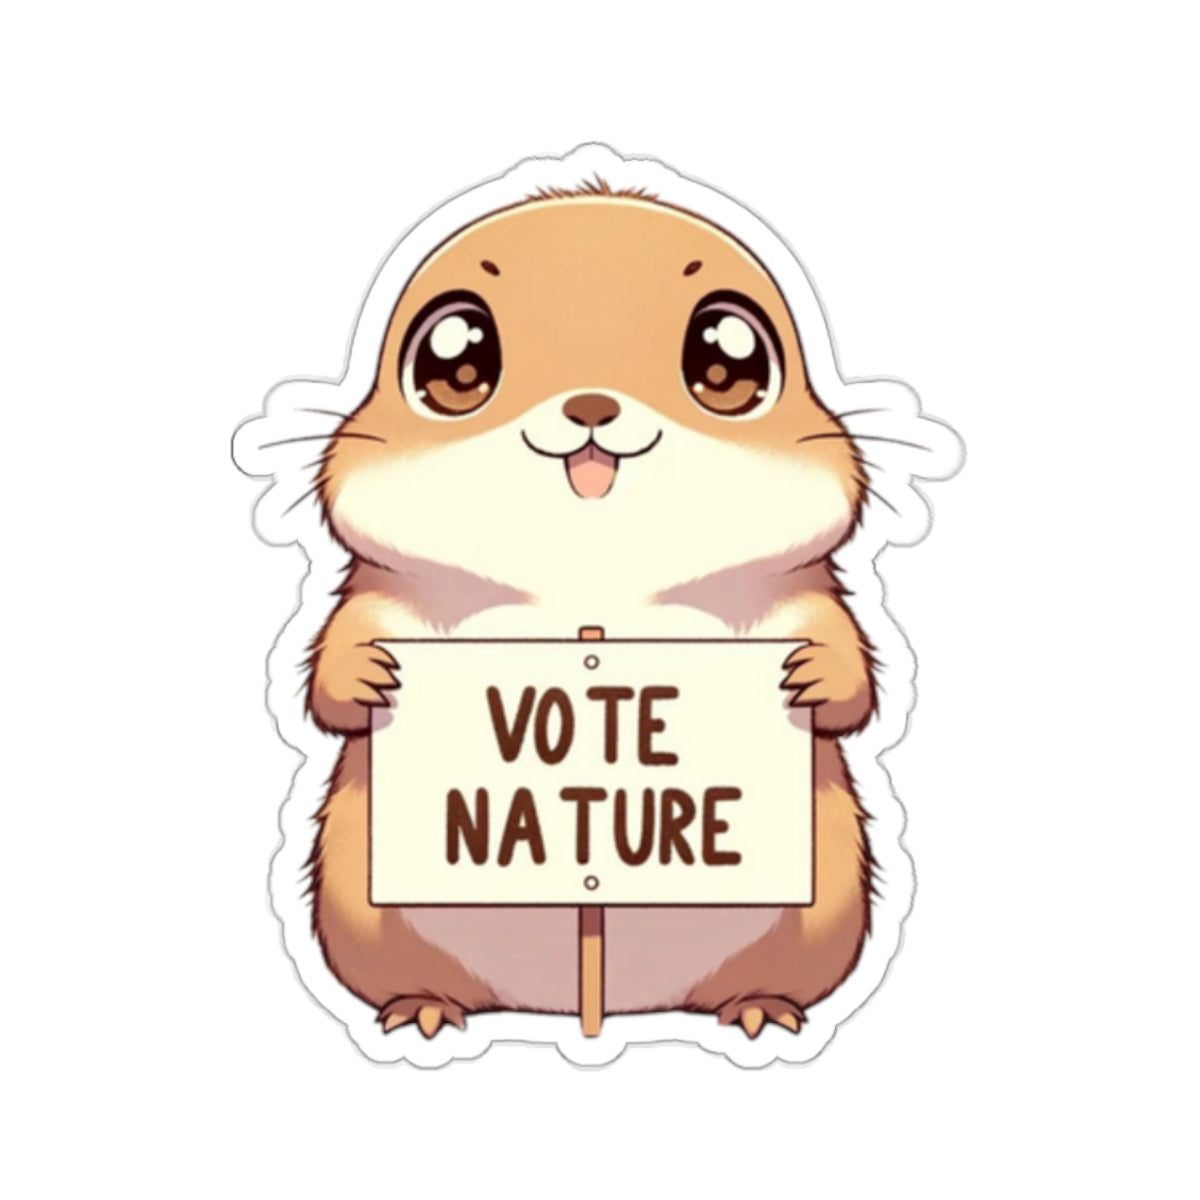 Inspirational Cute Prairie Dog Statement vinyl Sticker: Vote Nature! for laptop, kindle, phone, ipad, instrument case, notebook, mood board